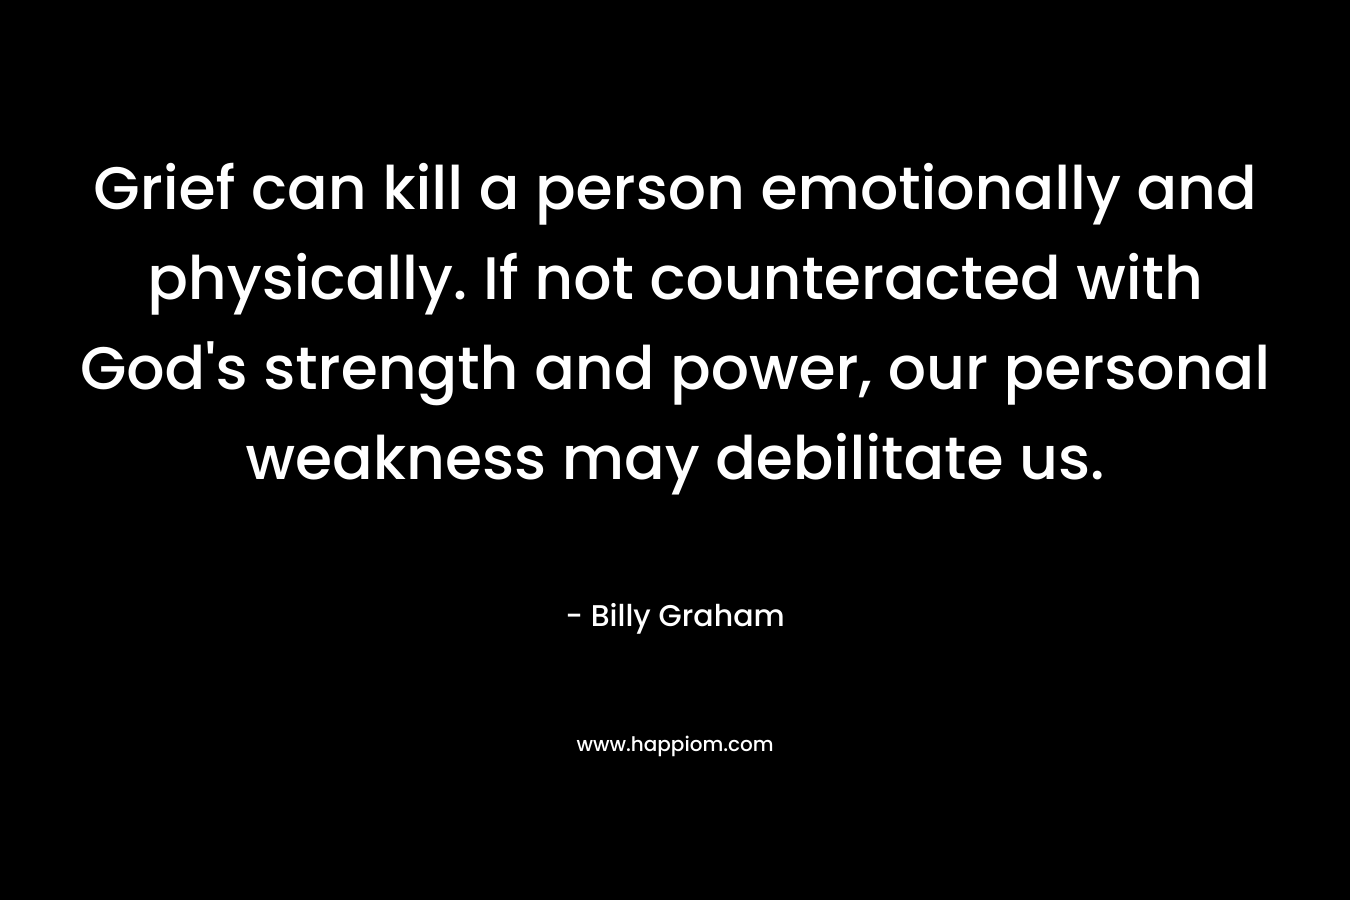 Grief can kill a person emotionally and physically. If not counteracted with God's strength and power, our personal weakness may debilitate us.